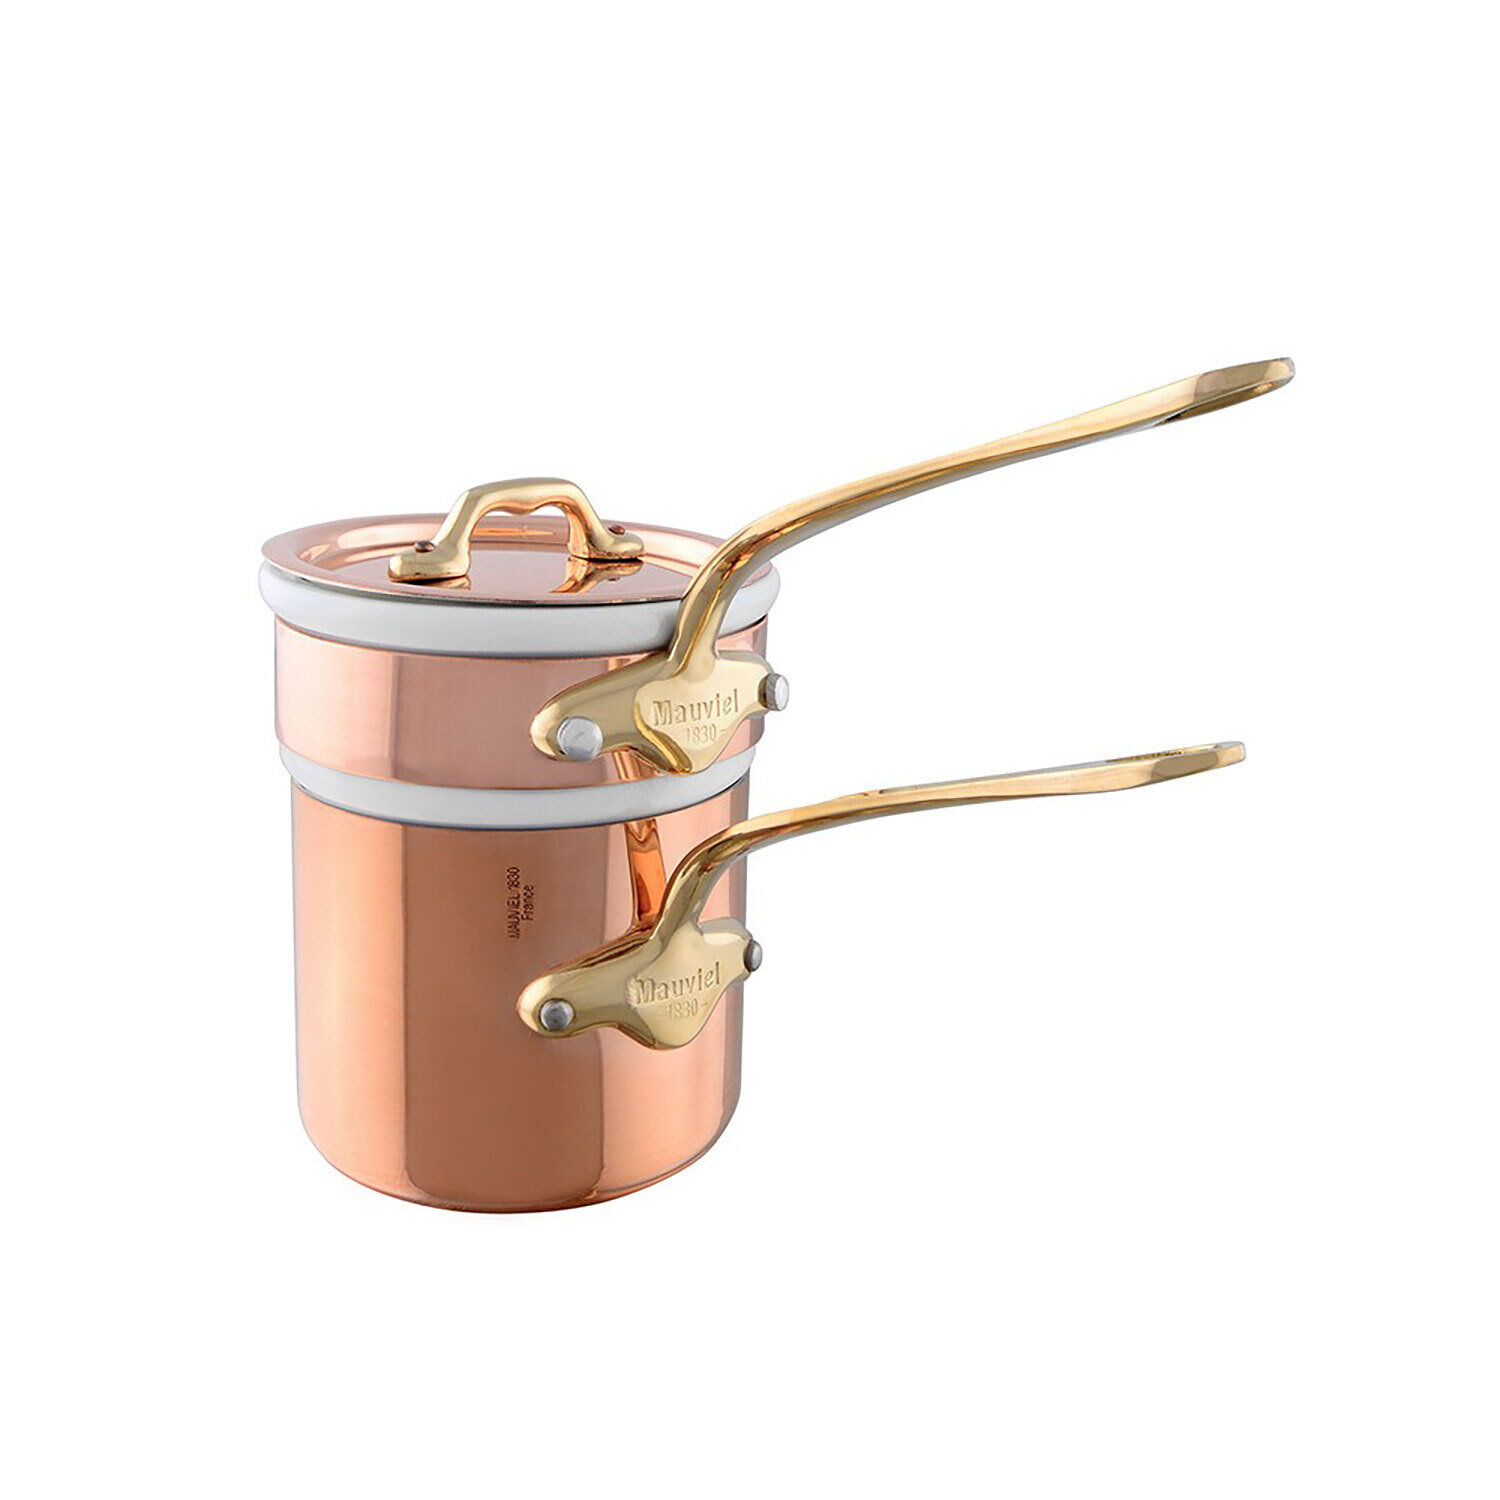 Mauviel Copper Bain Marie with Bronzehandle 14cm 650414